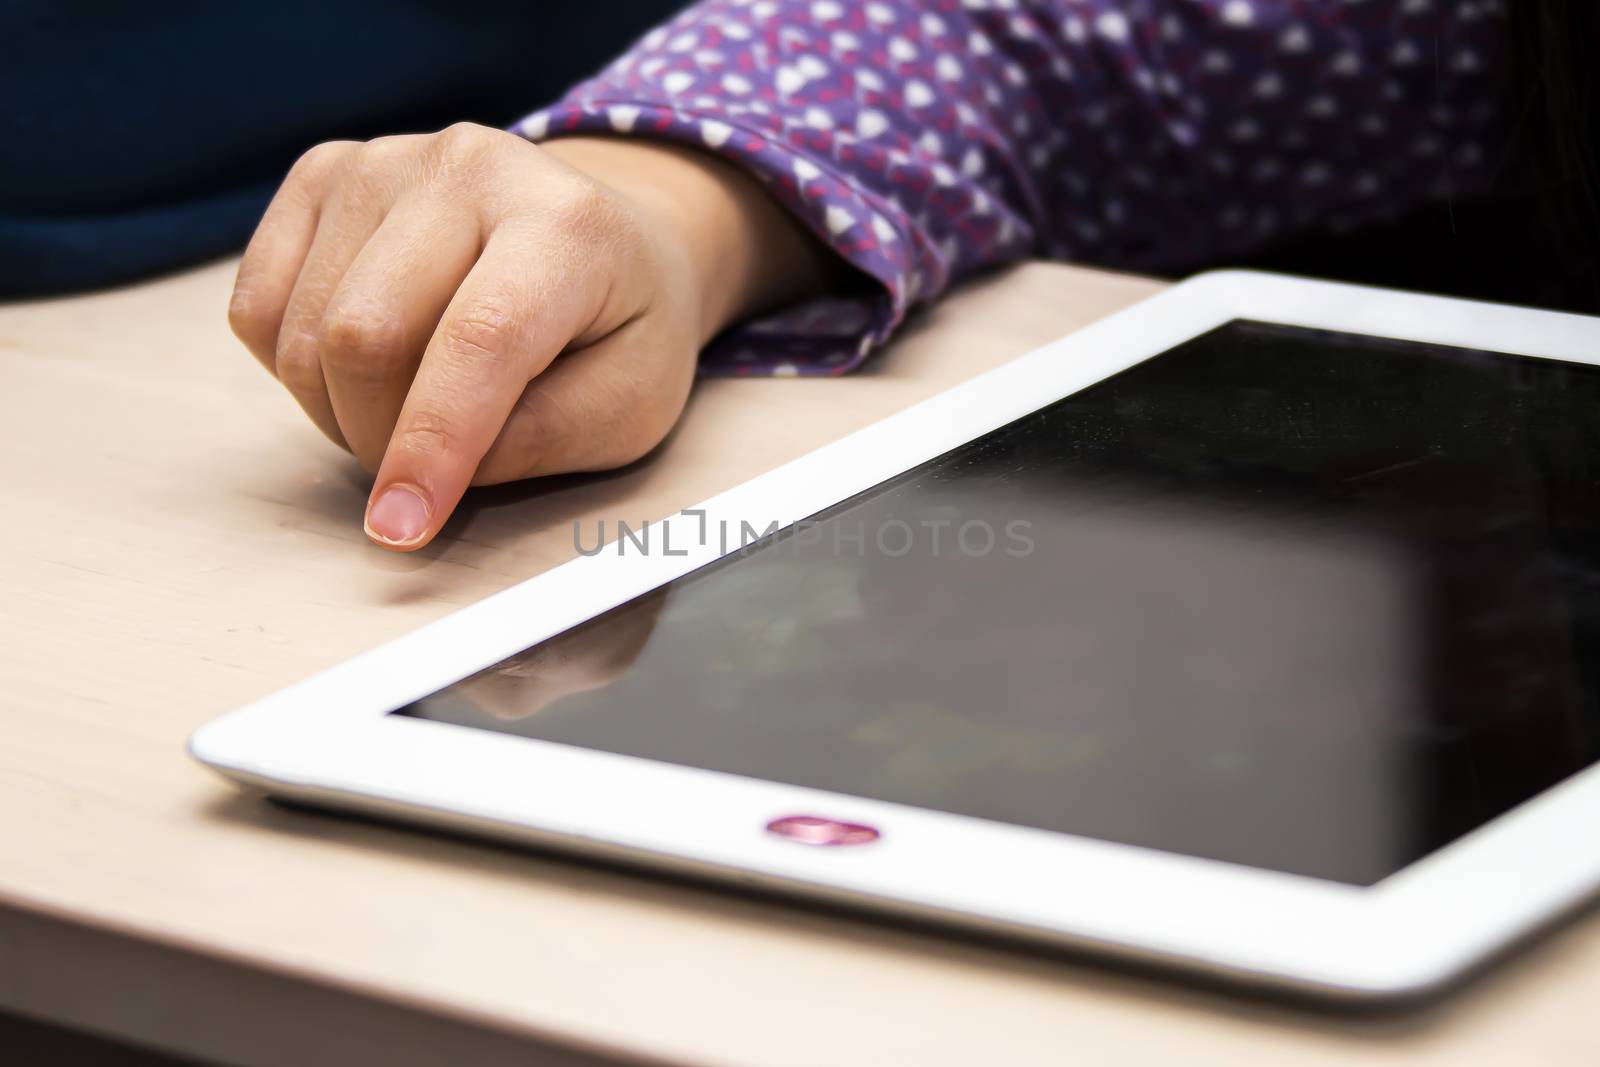 Close up front view of a little girl's hand using and white tablet with a privacy camera cover, during the day time